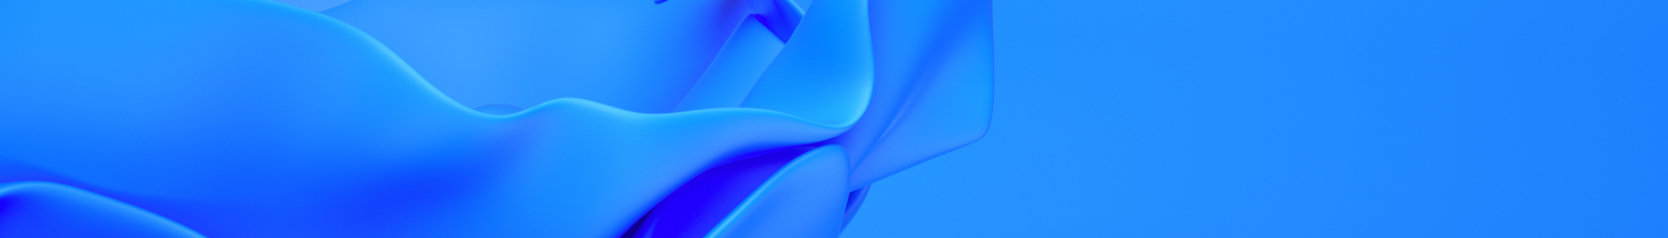 1668x238 Resolution Windows 11 Style Abstract 1668x238 Resolution